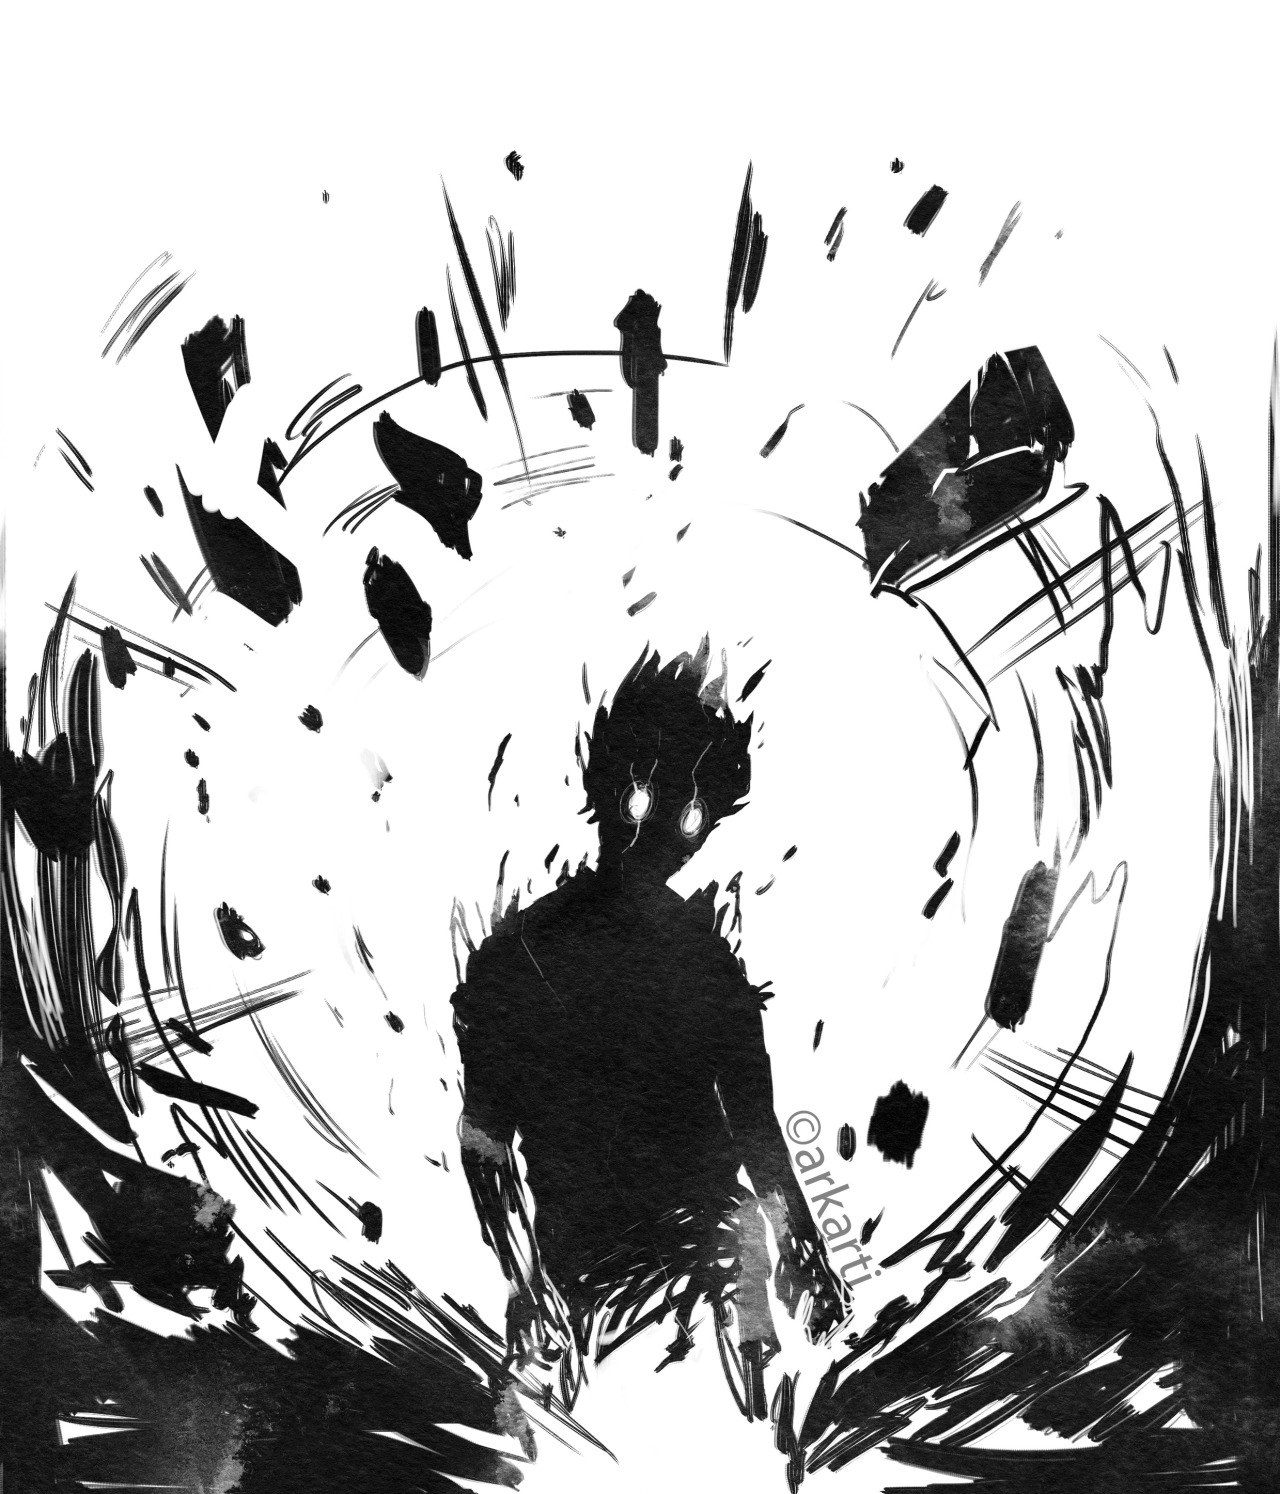 Mob Psycho 100 III – 05 - Lost in Anime